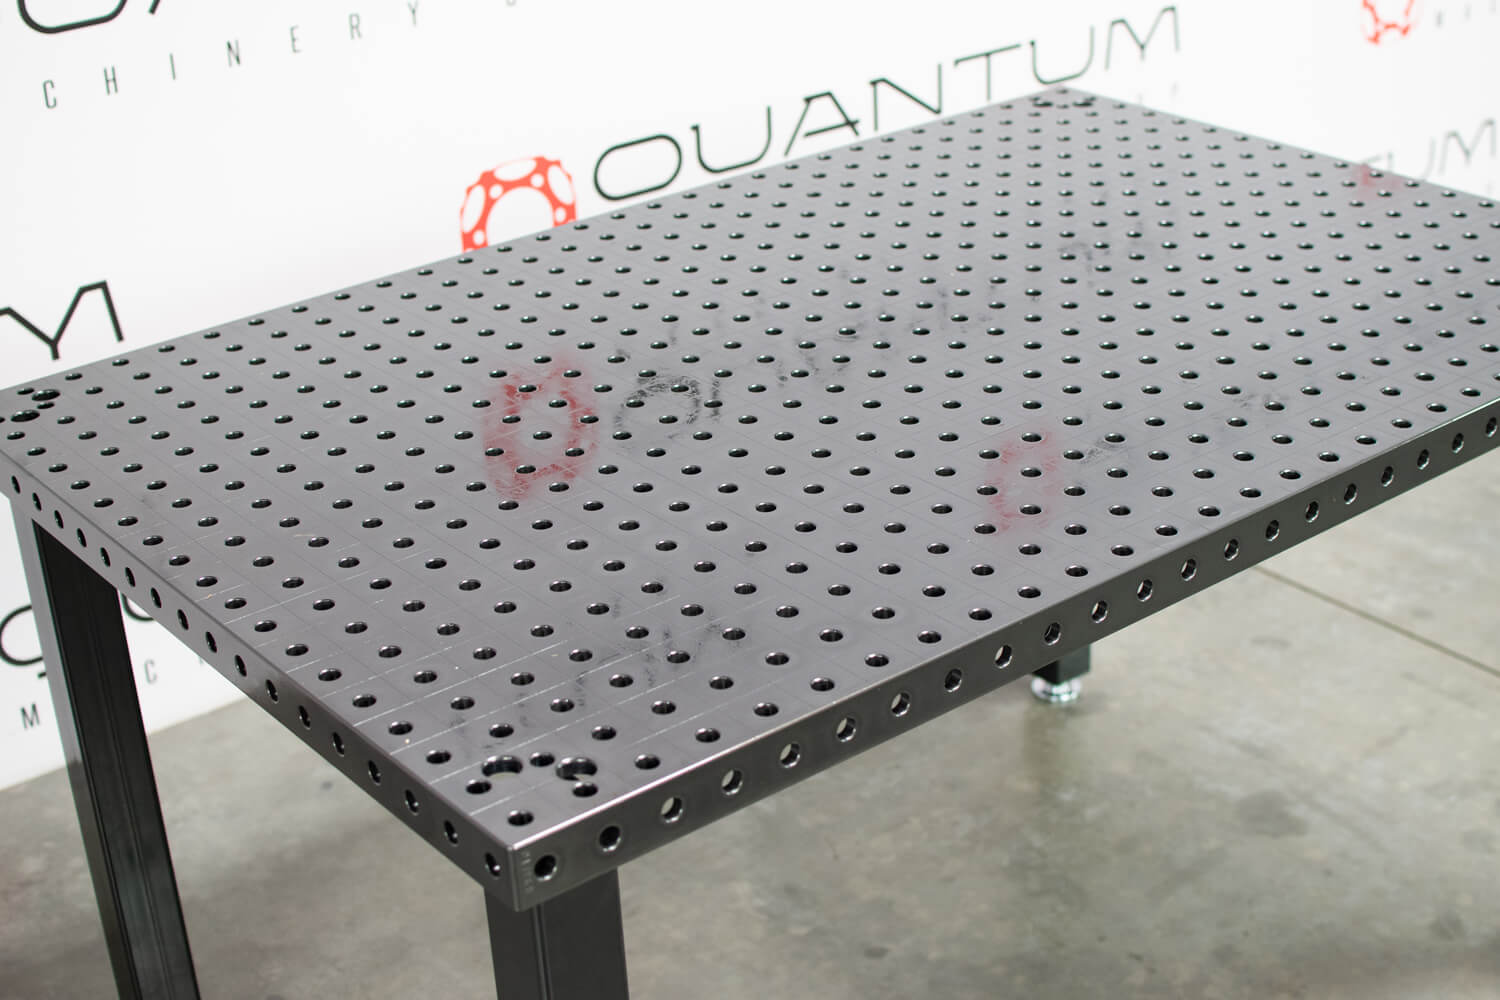 System 16 1500x1000mm (59"x39") Siegmund "BASIC" Welding Table (Item No. 4-161035.P) - Siegmund Welding Tables and Fixtures USA - A Division of Quantum Machinery Group